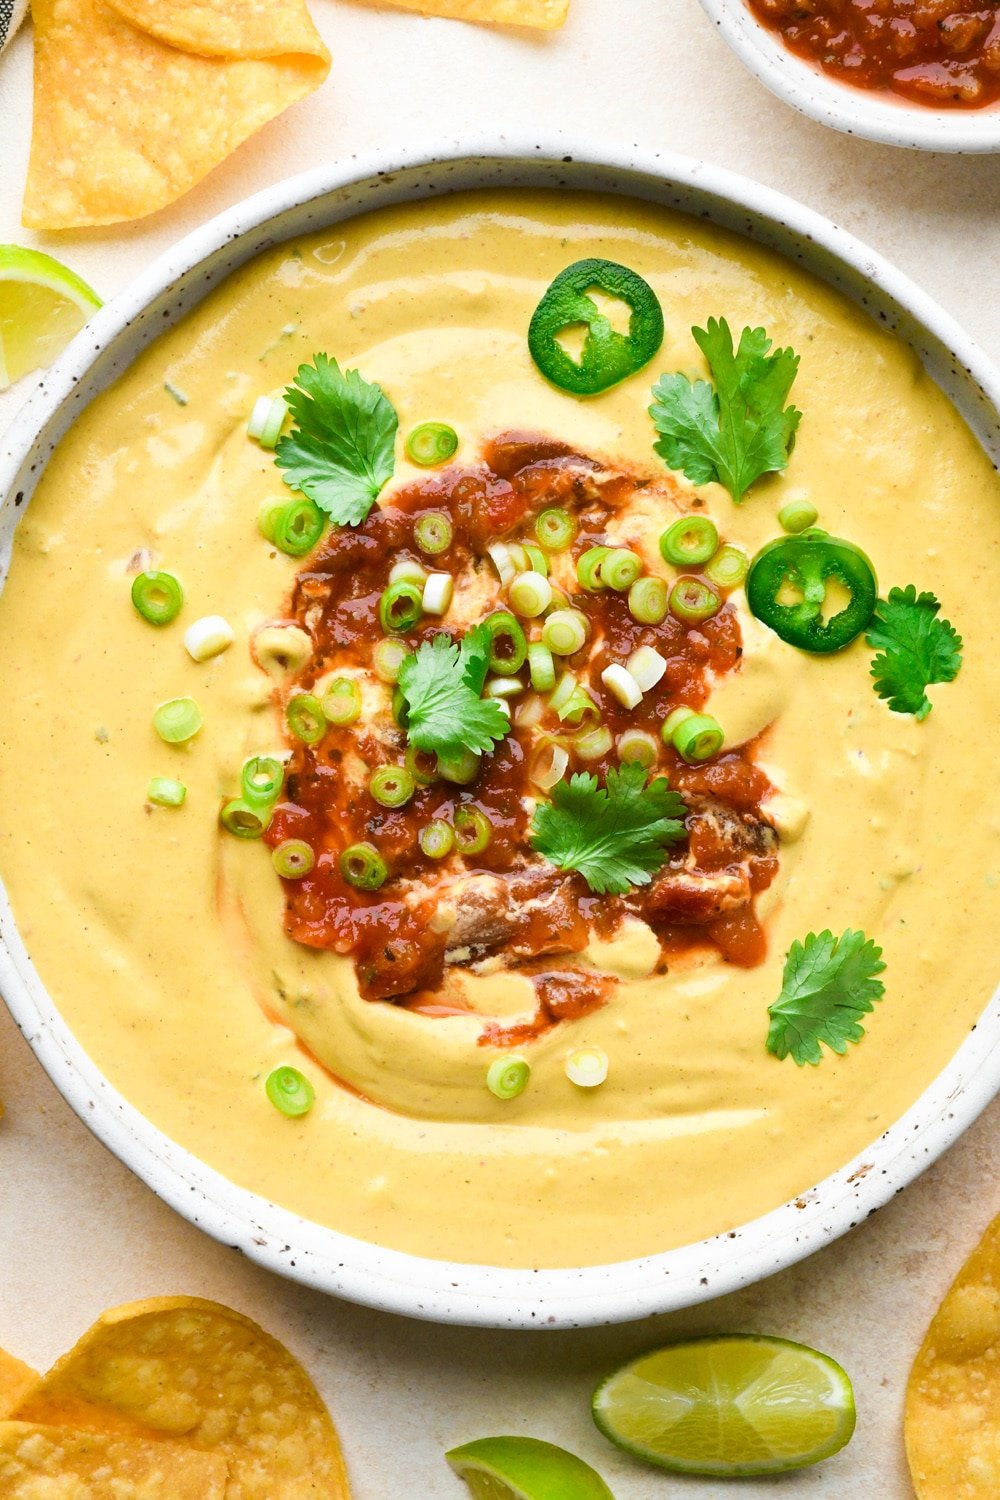 How to make cashew queso: Cashew queso in a shallow ceramic bowl, garnished with a swirl of salsa, green onions, cilantro, and jalapeño slices.